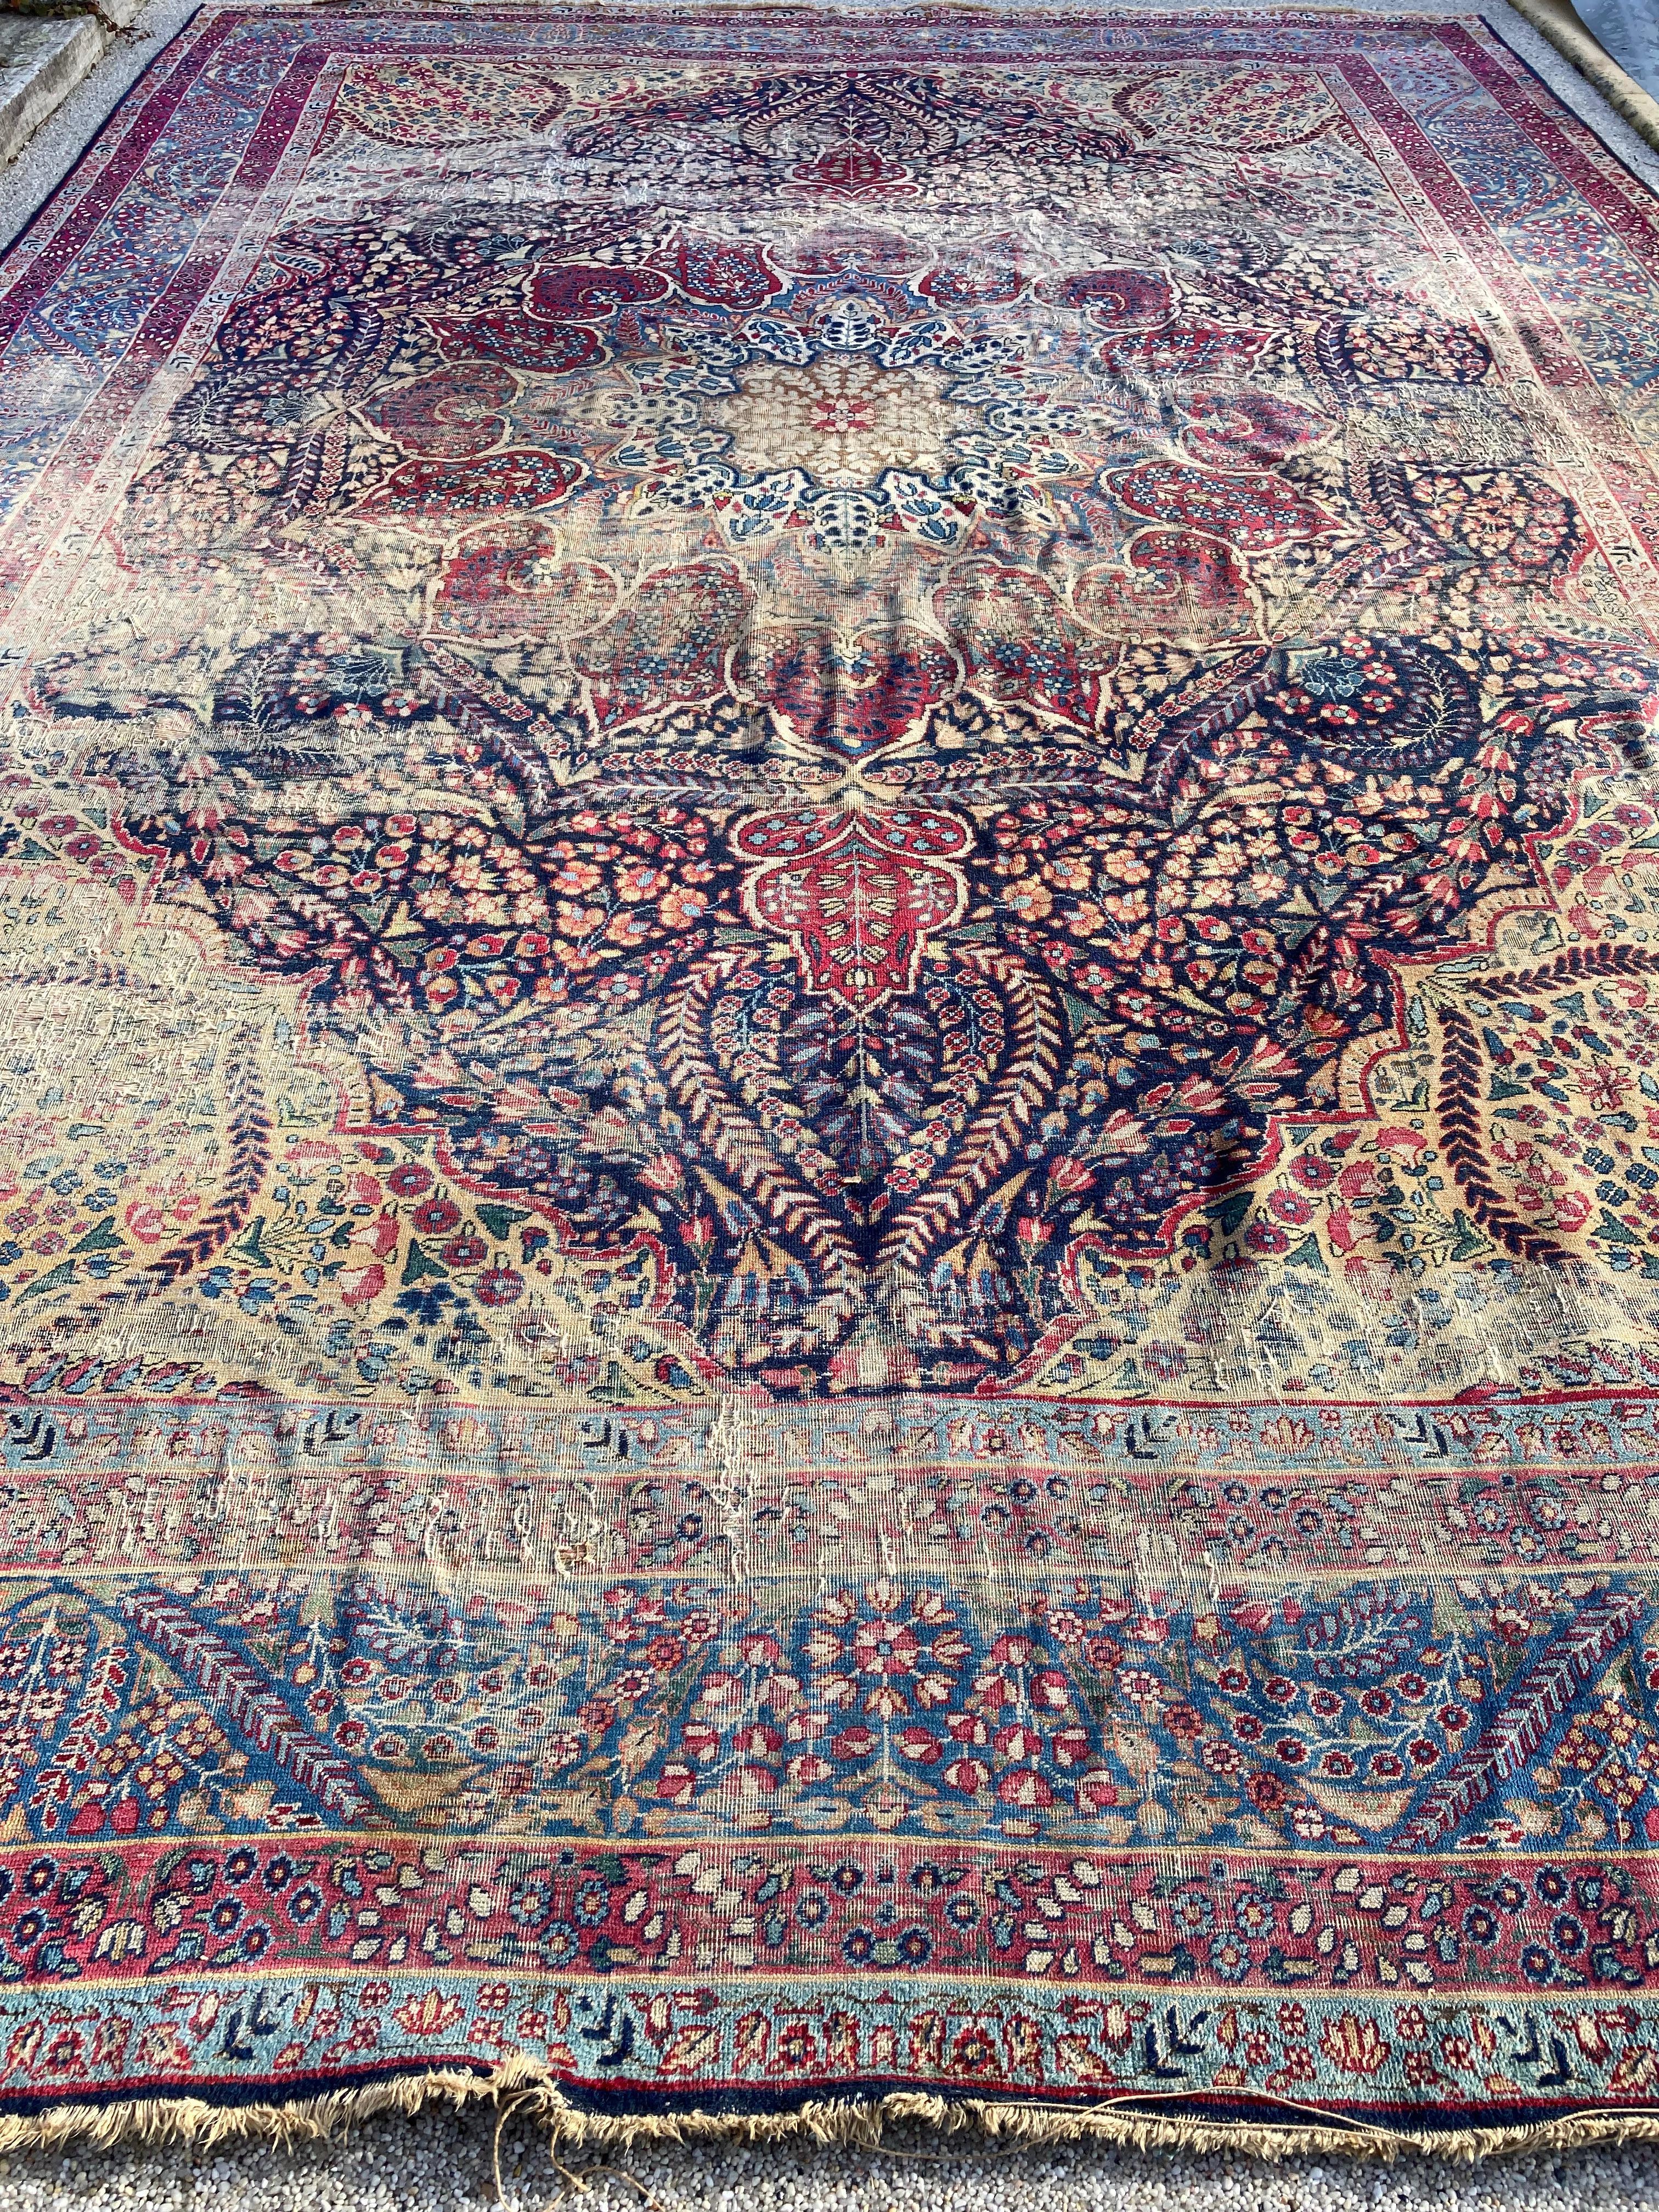 Antique Persian Kirman rug.

Antique Persian Kirman rug circa 1940. 
Worn but beautiful with an intricate floral pattern and unique colors.